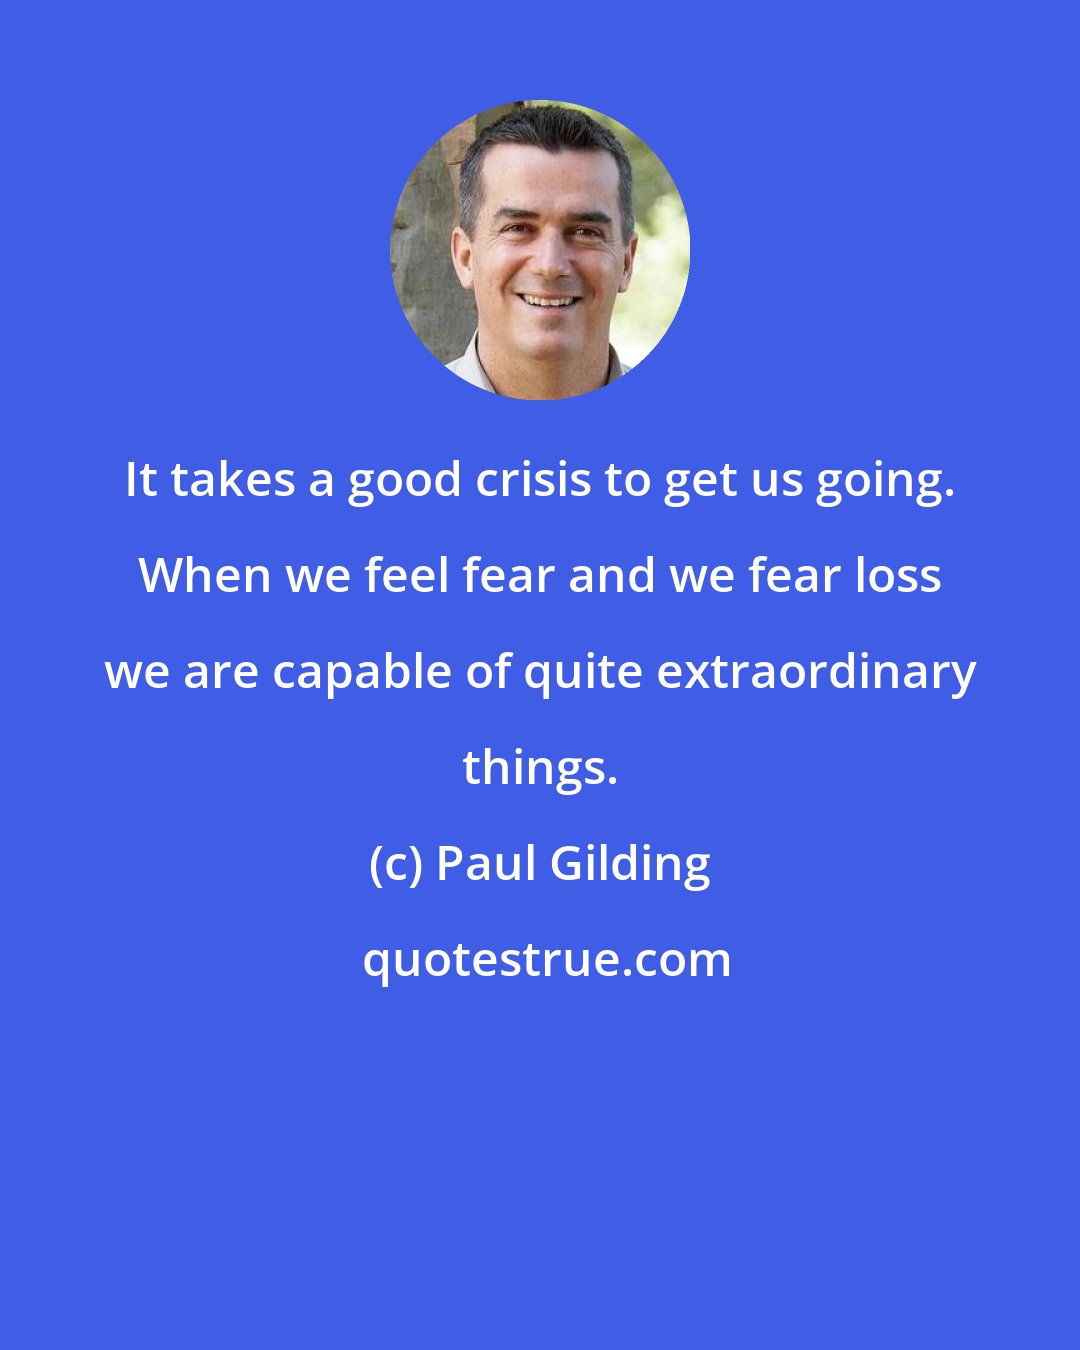 Paul Gilding: It takes a good crisis to get us going. When we feel fear and we fear loss we are capable of quite extraordinary things.